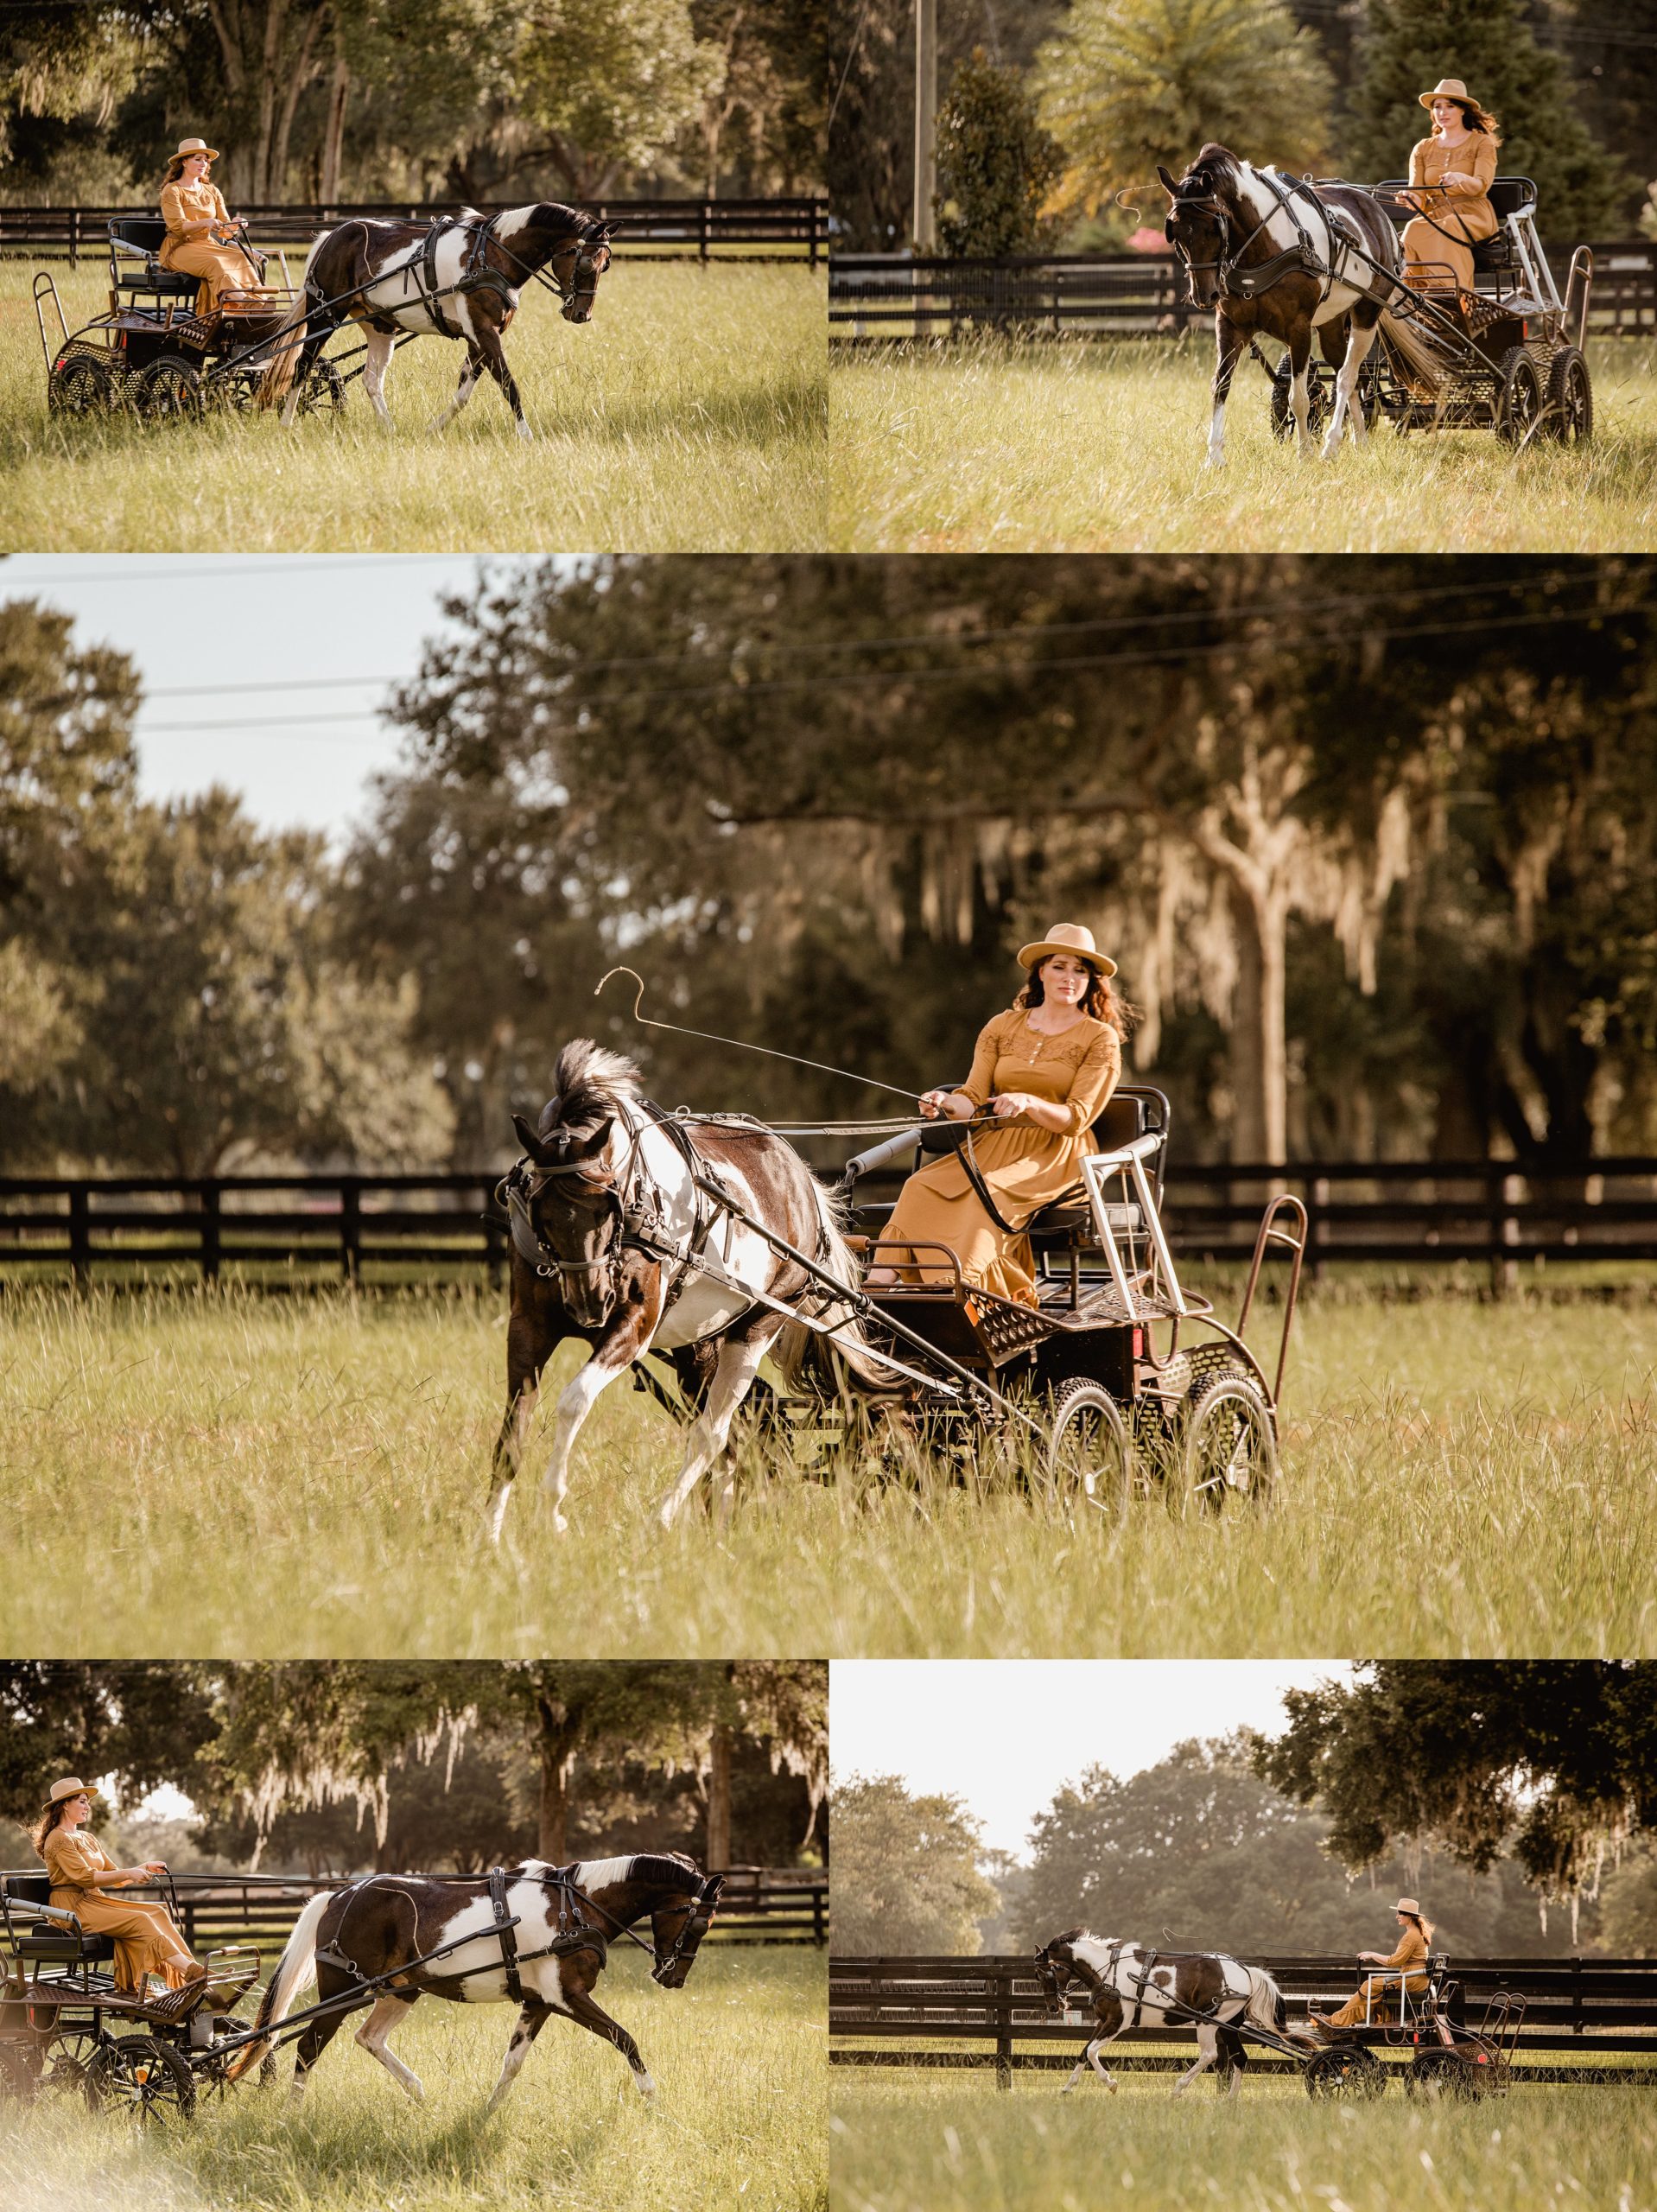 APHA horse drives carriage during photoshoot.